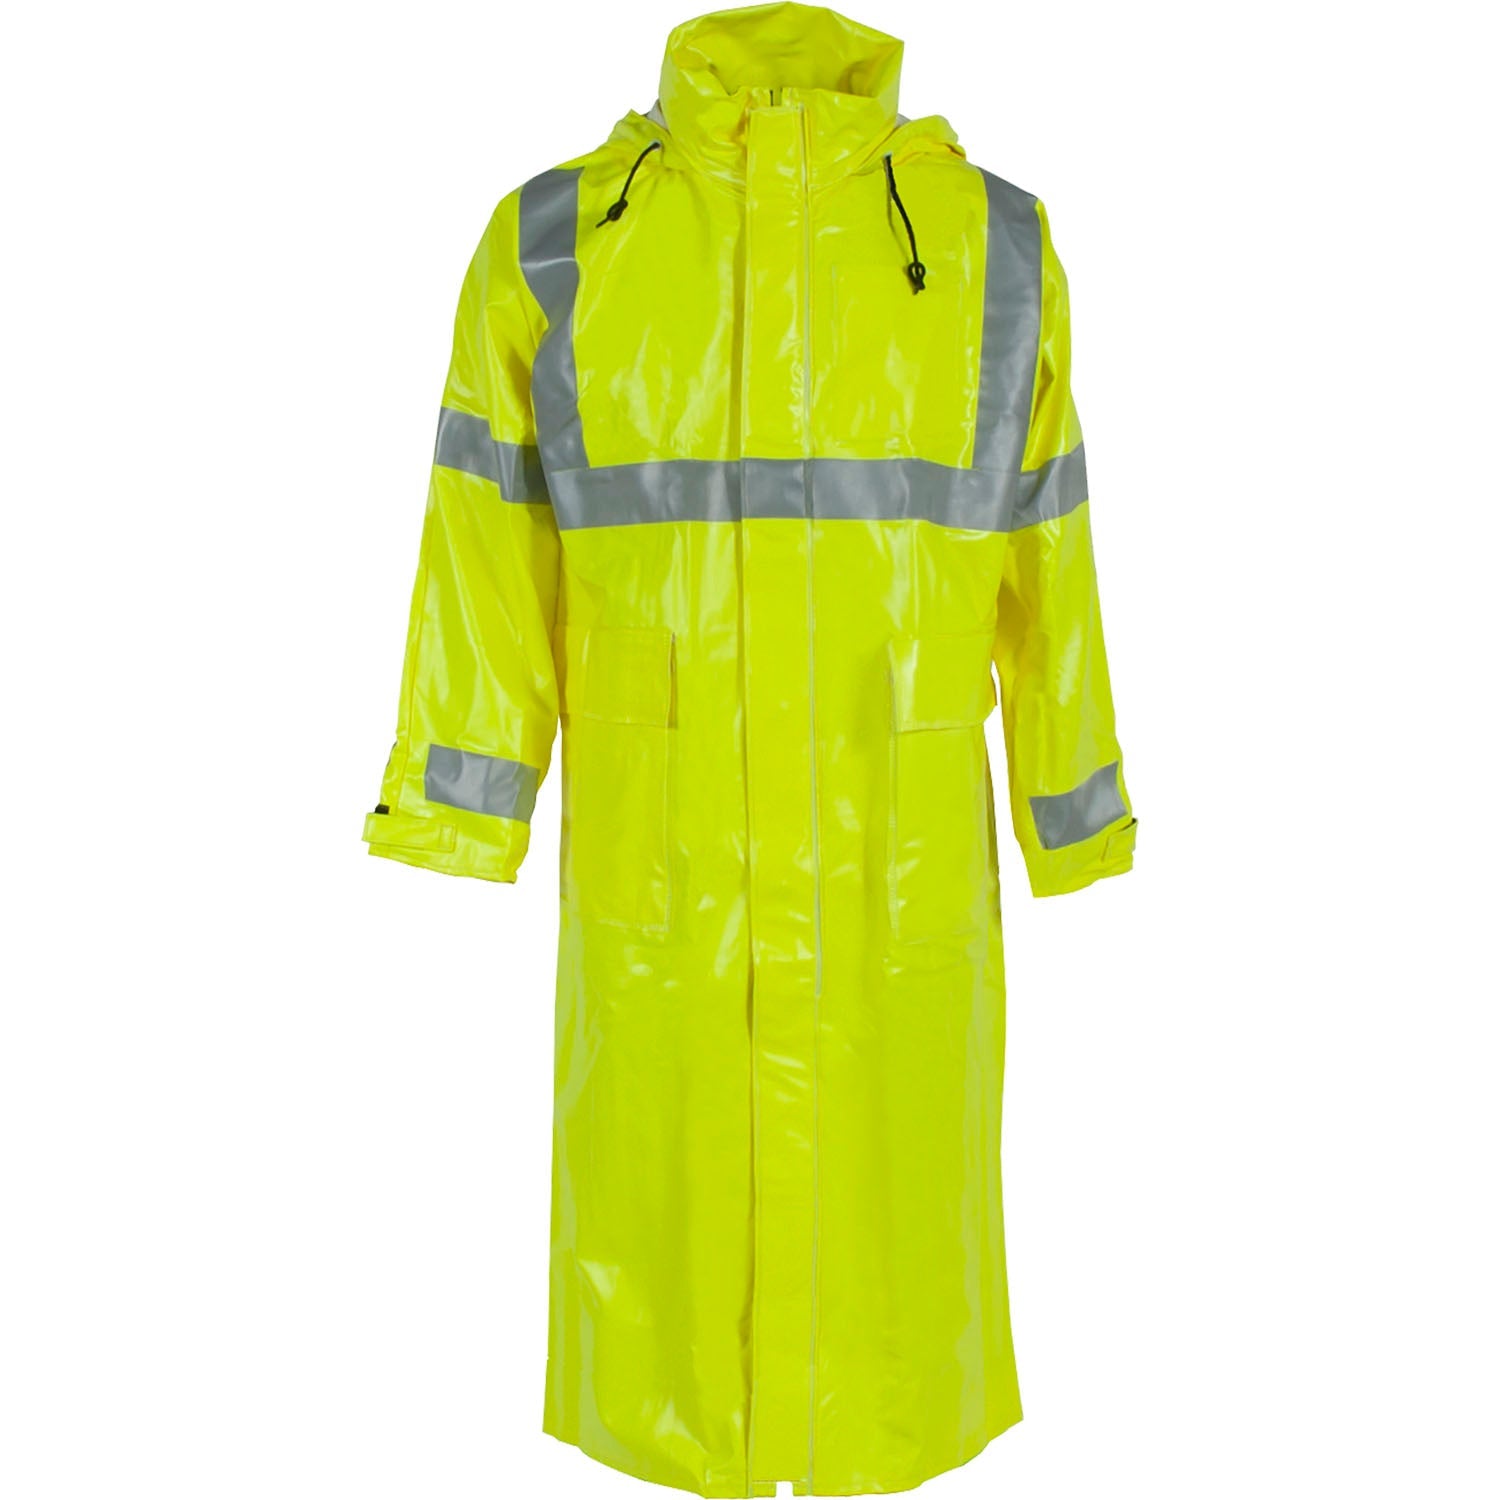 Neese 267AC Dura Arc II Coat with Attached Hood